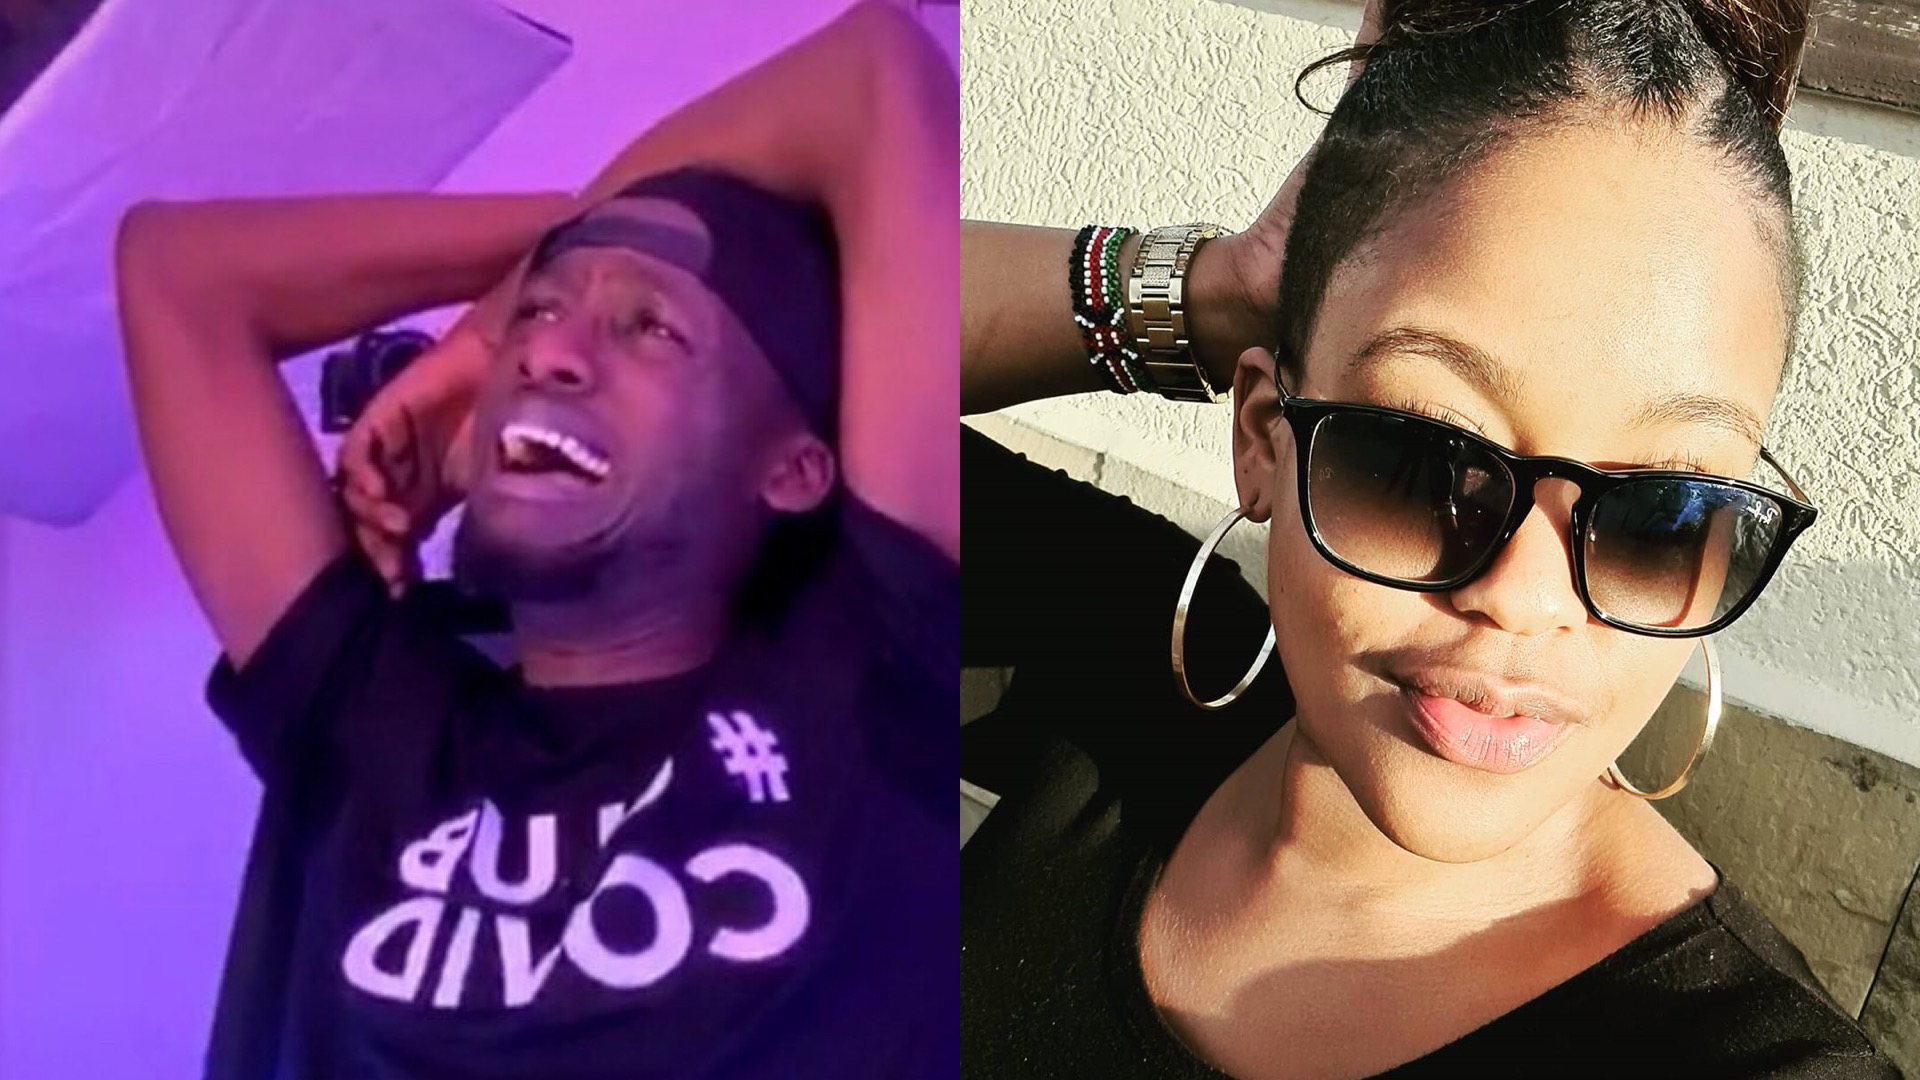 "Never wrestle with a pig" Kamene Goro's cryptic post confirms beef with Xtian Dela